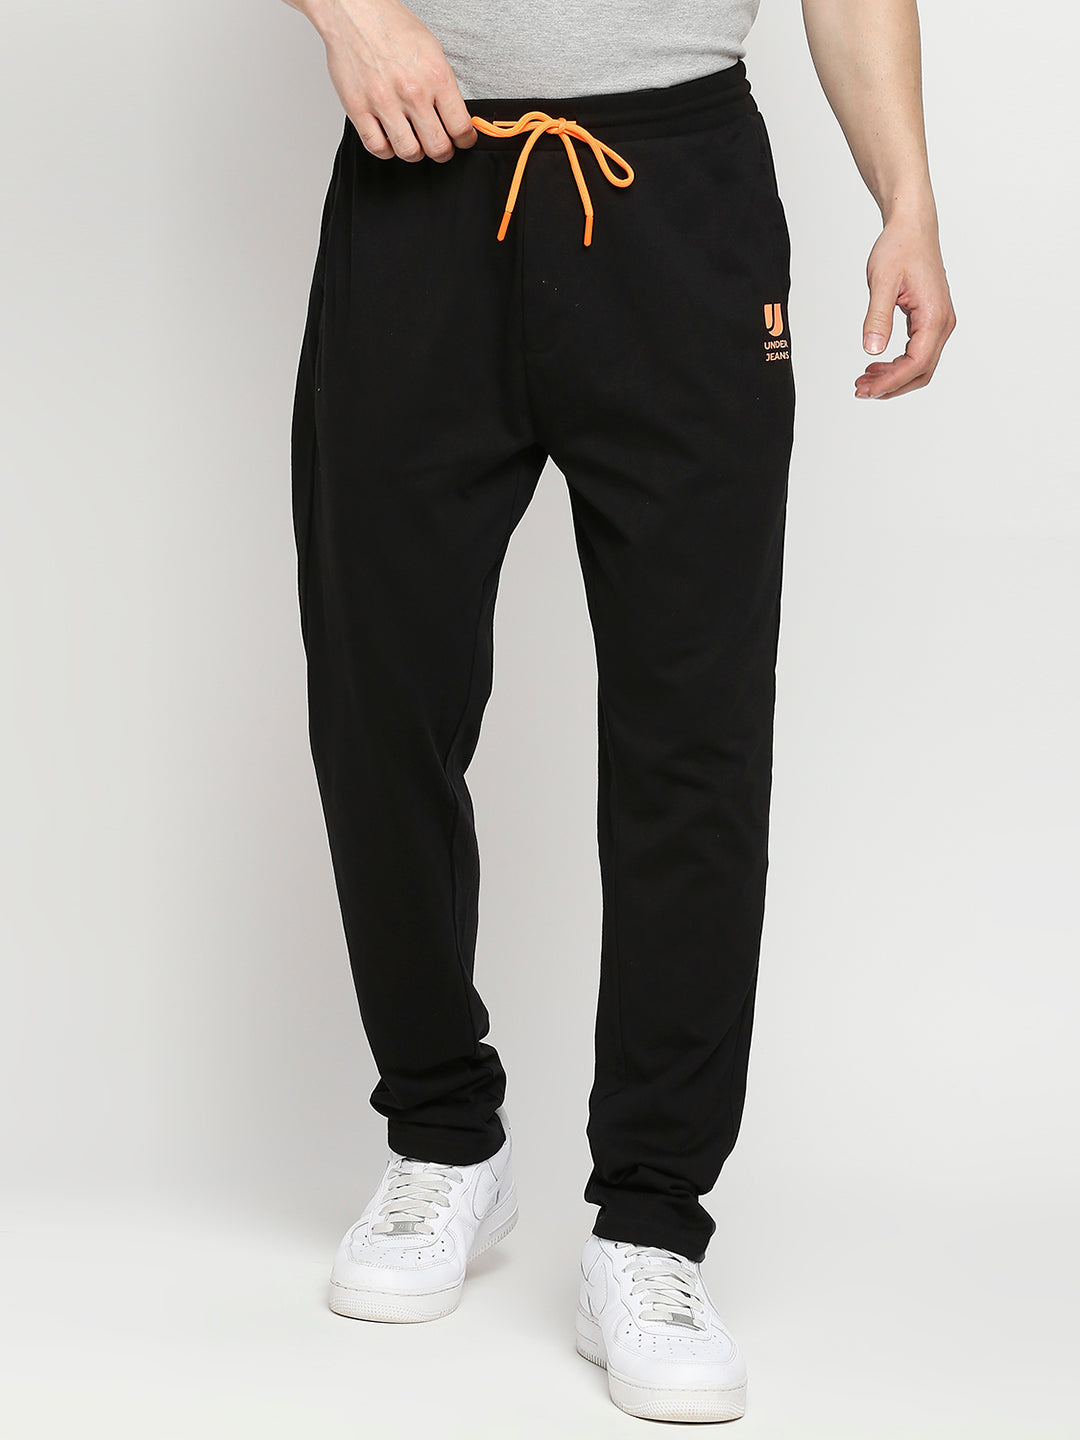 Men Cotton Blend Knitted Black Trackpant- Underjeans by Spykar